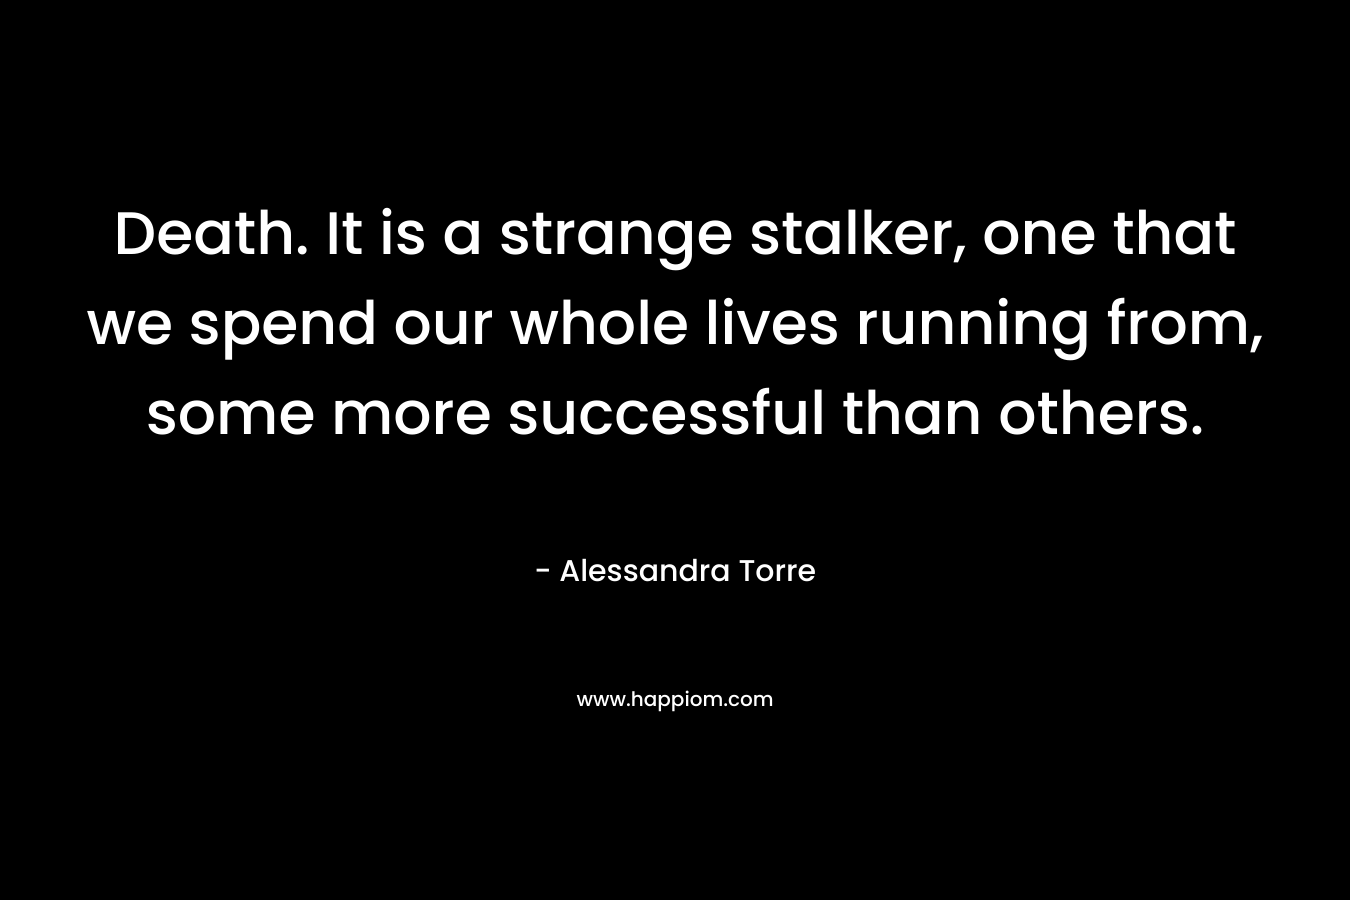 Death. It is a strange stalker, one that we spend our whole lives running from, some more successful than others. – Alessandra Torre